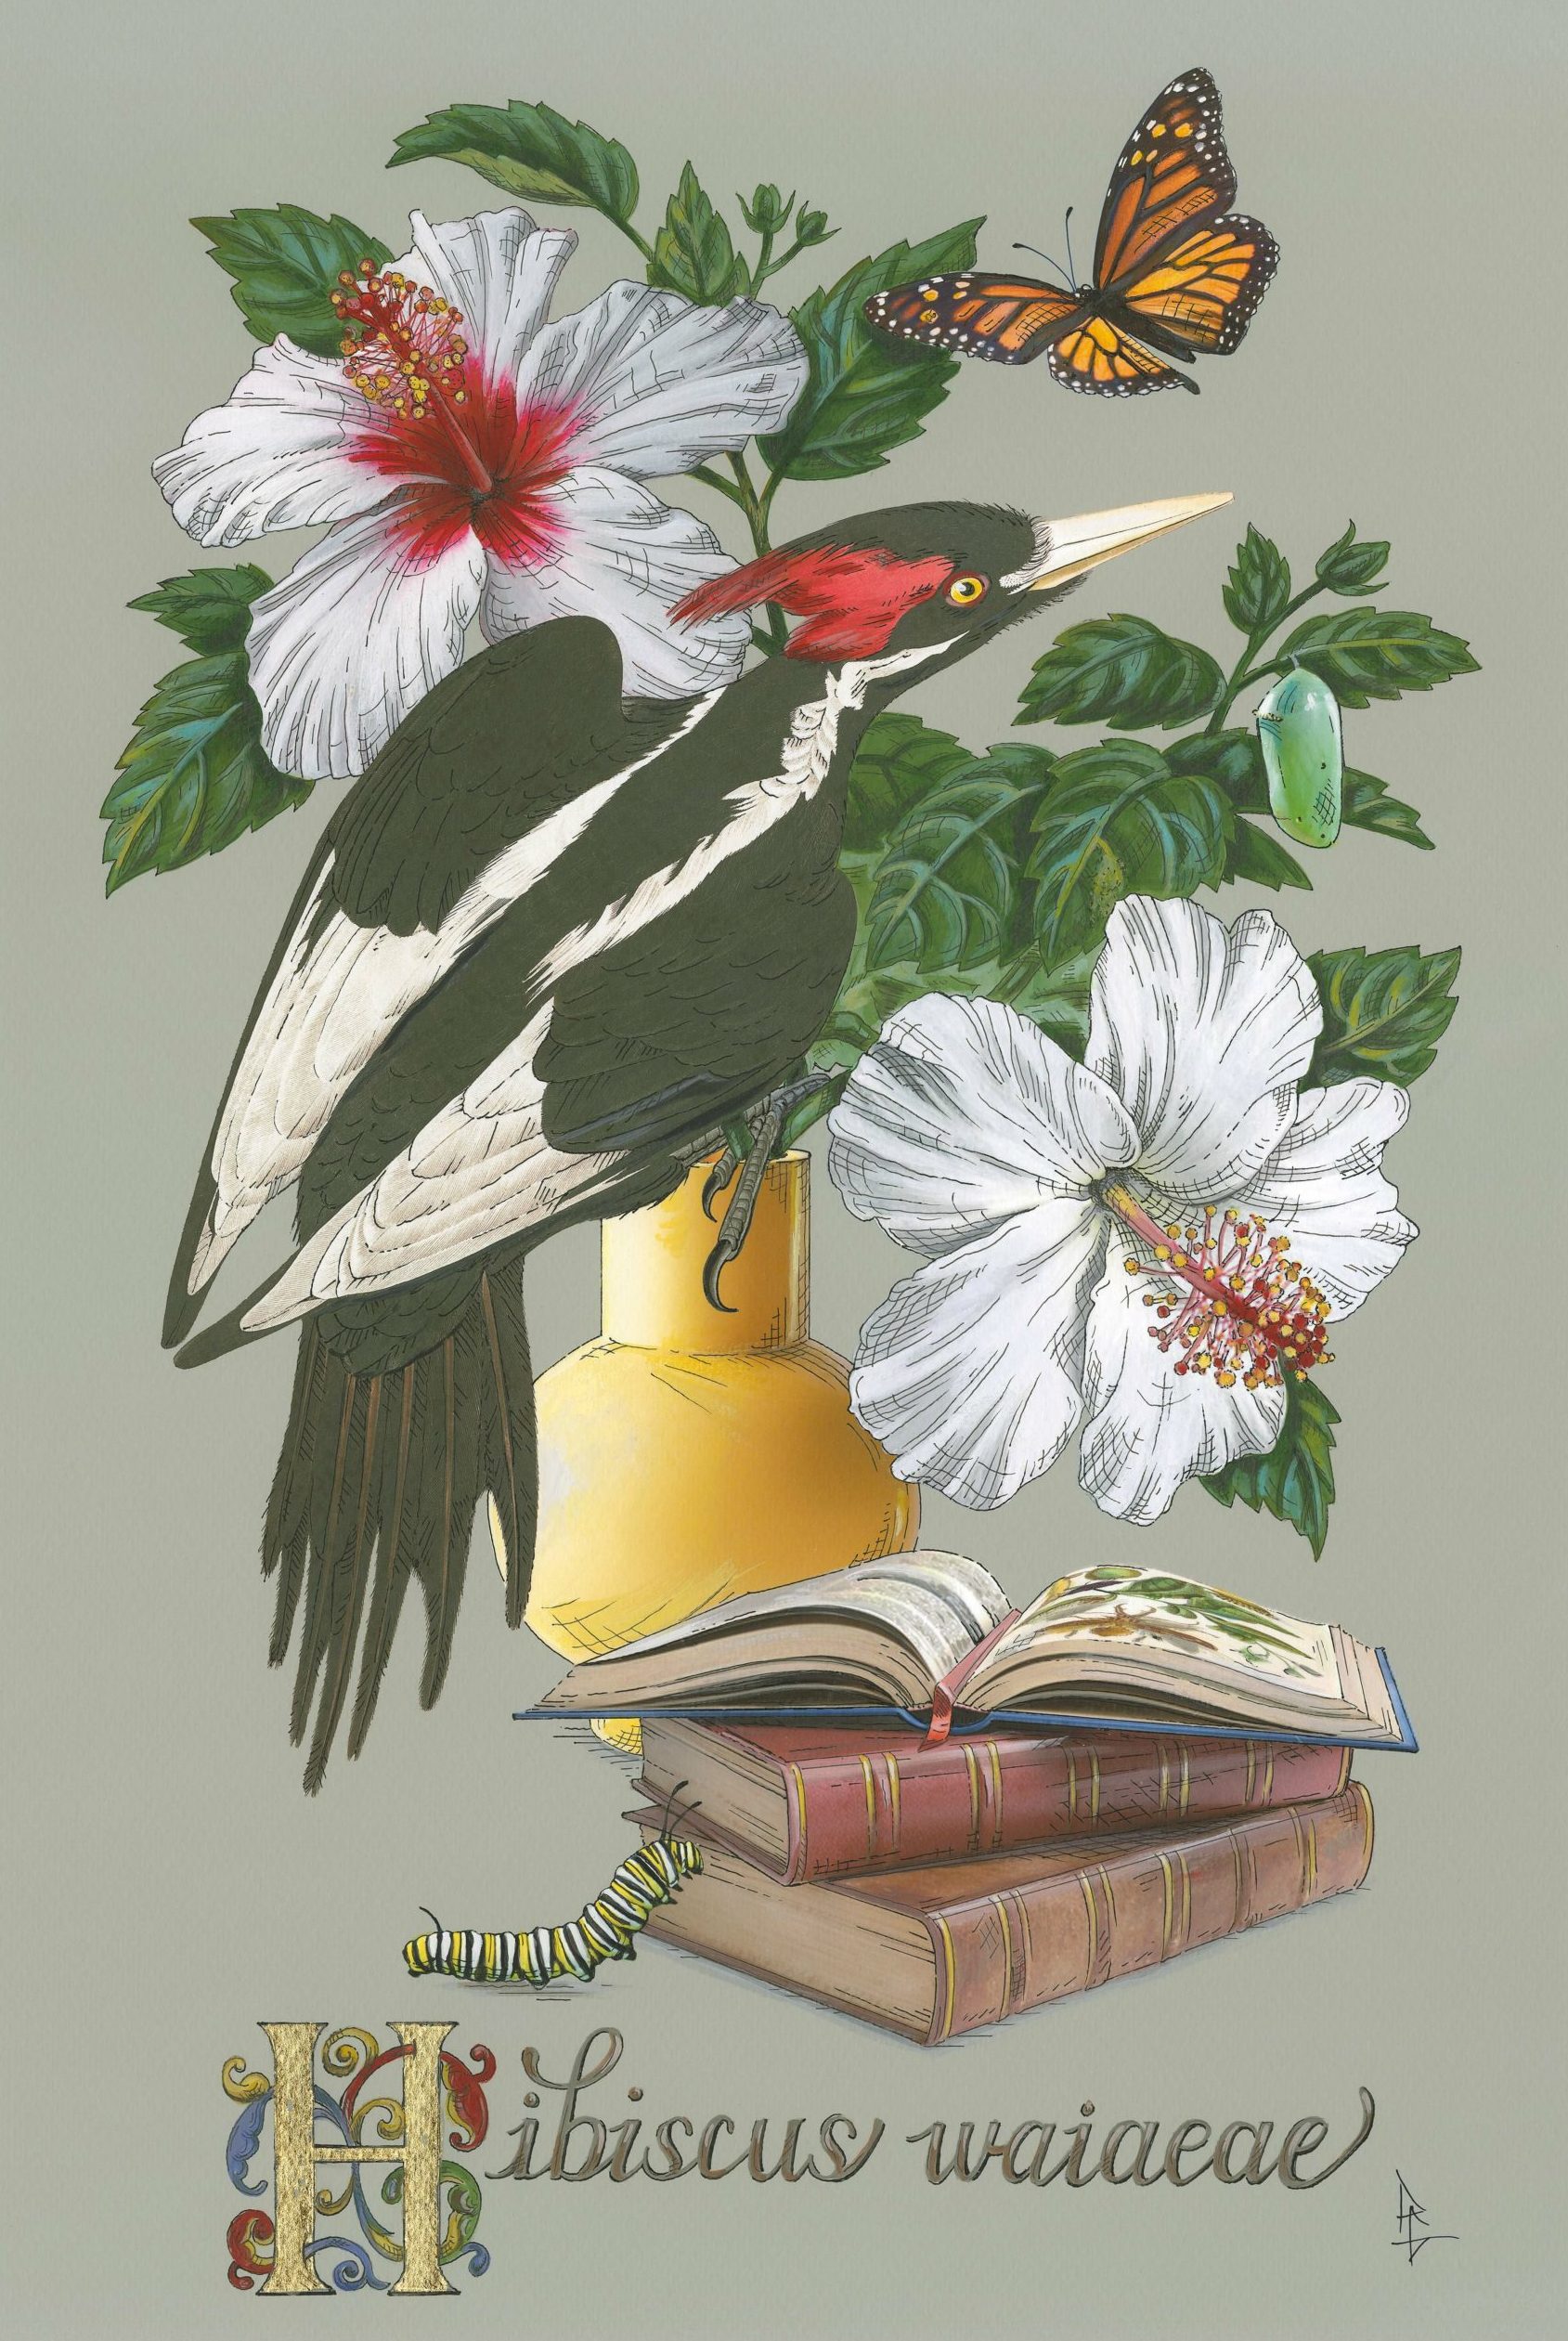 

											Penelope Gottlieb</b>

											<em>
												Penelope Gottlieb  New Works</em> 

											<h4>
												June 25 - July 24, 2021											</h4>

		                																																													<i>Hibiscus waiaeae,</i>  
																																								2020-2021, 
																																								acrylic and ink over a digital reproduction of an Audubon print, 
																																								18 x 12 inches 
																								
		                				